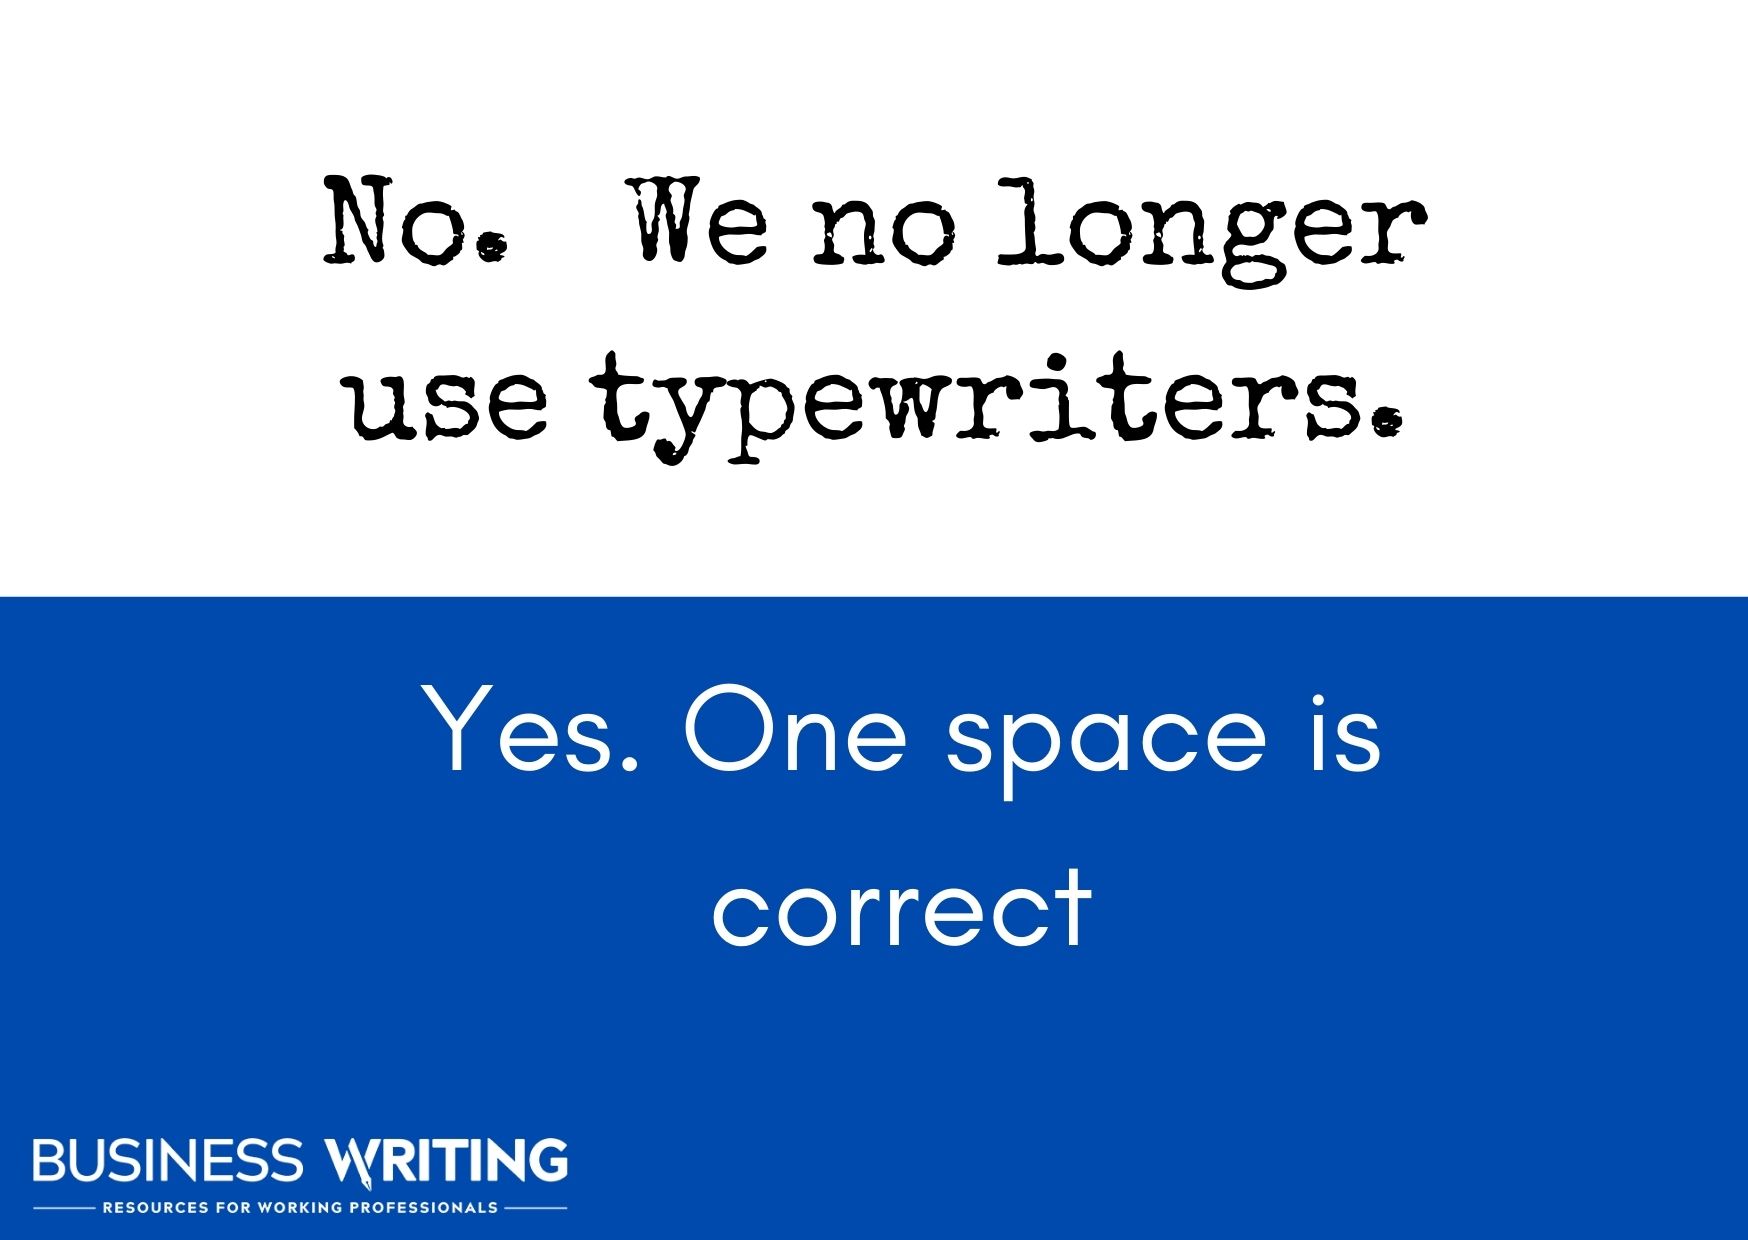 A graphic explaining that we do not use two spaces after a period anymore, as we no longer use typewriters